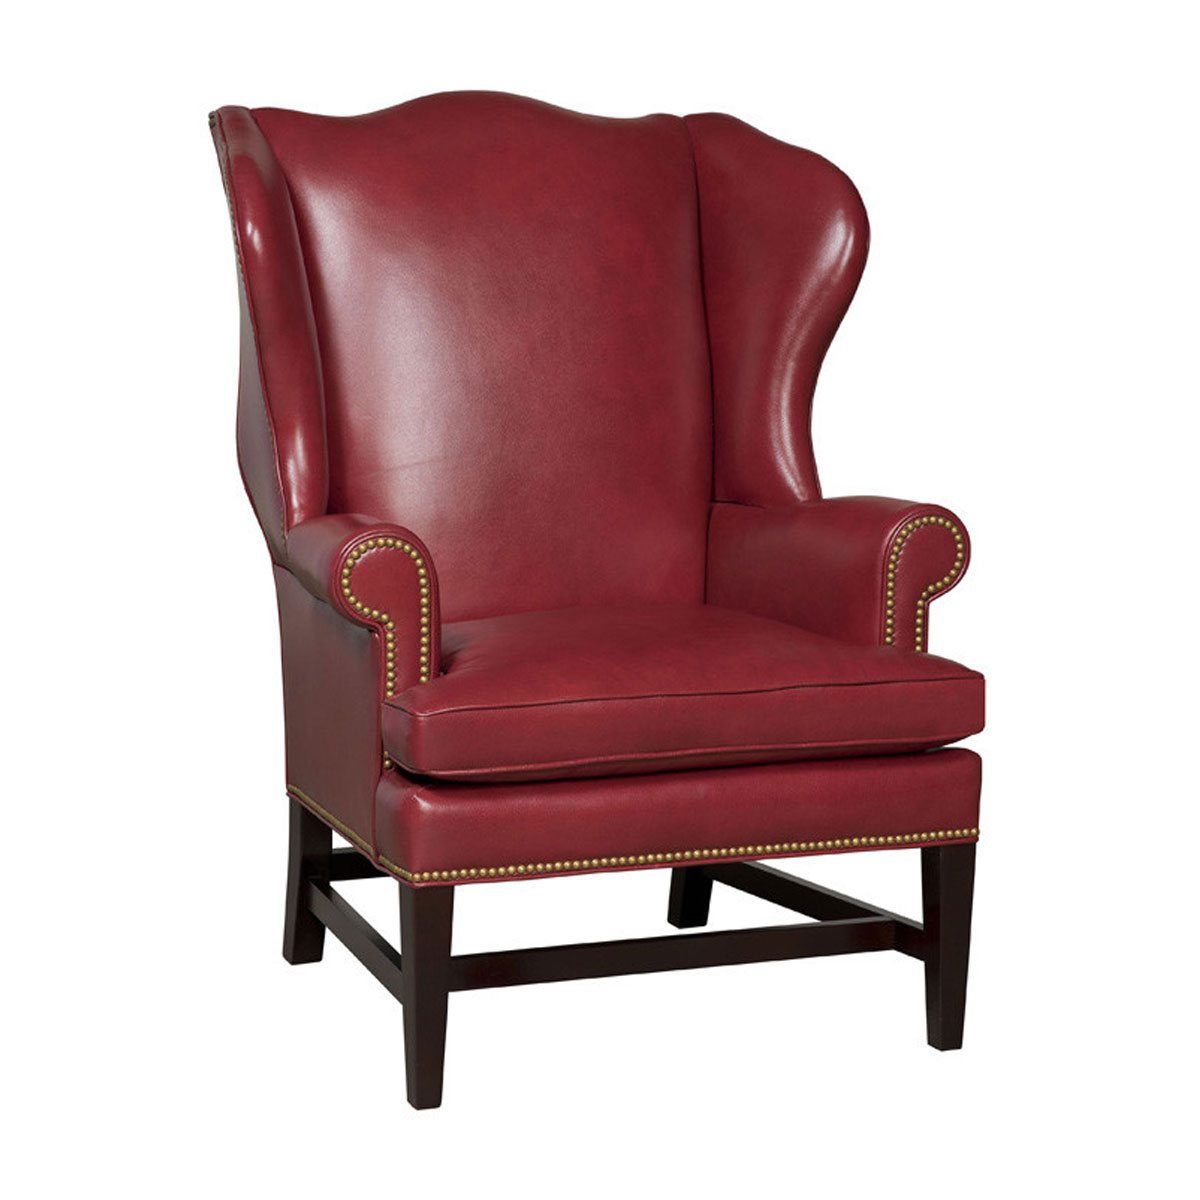 Botetourt 267 Wing Chair by McKinley Leather